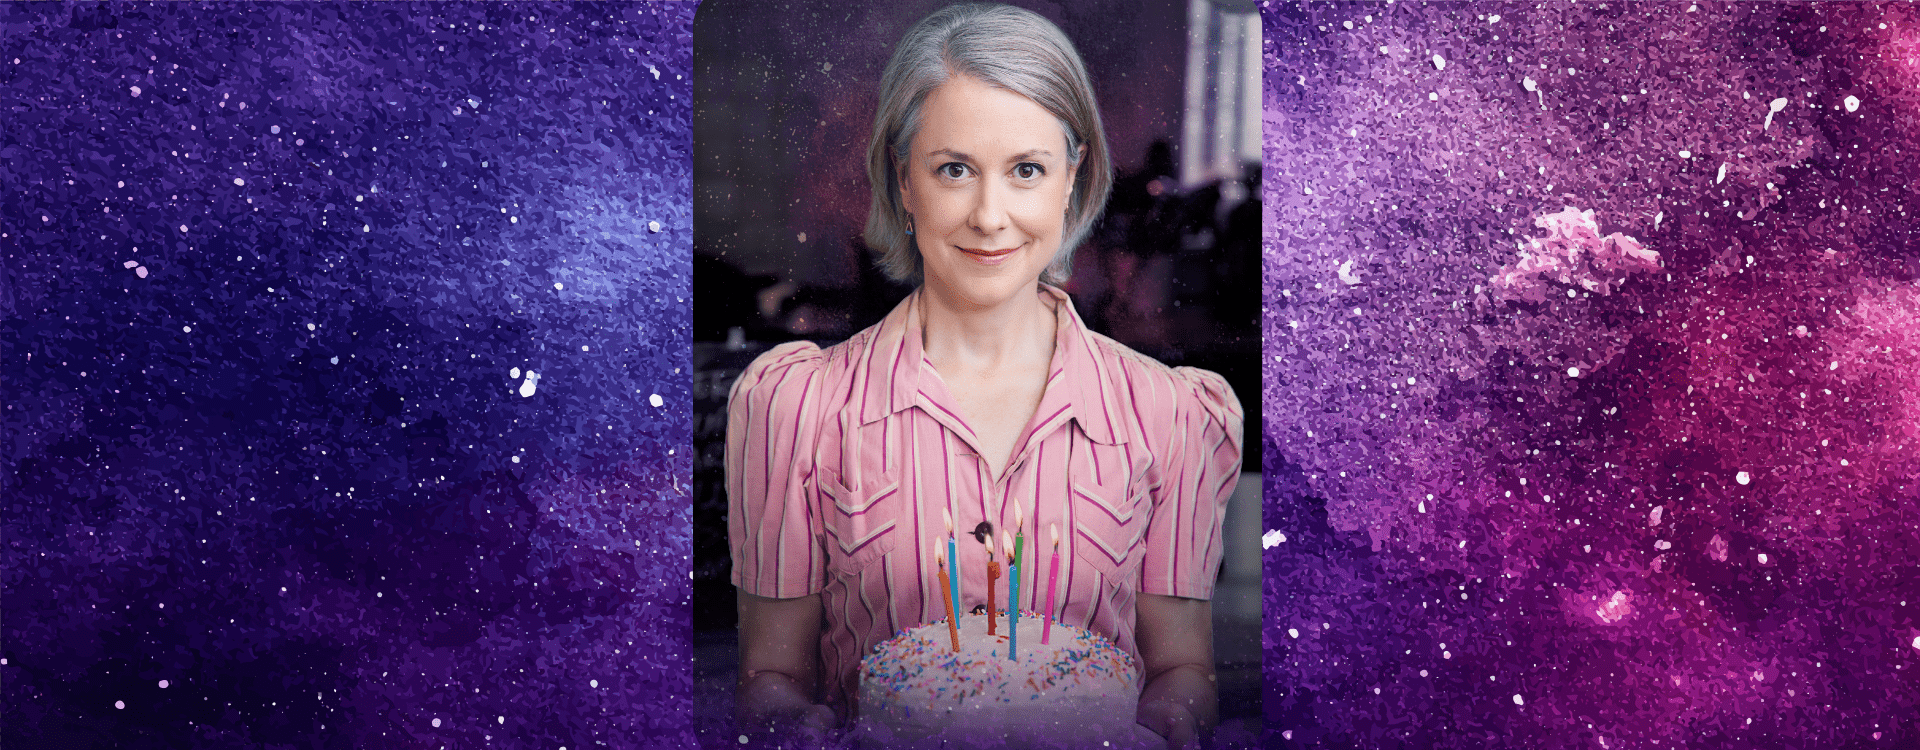 A blonde woman stands in a pink stripped dress holding a birthday cake. She stands in front of a purple galaxy background.